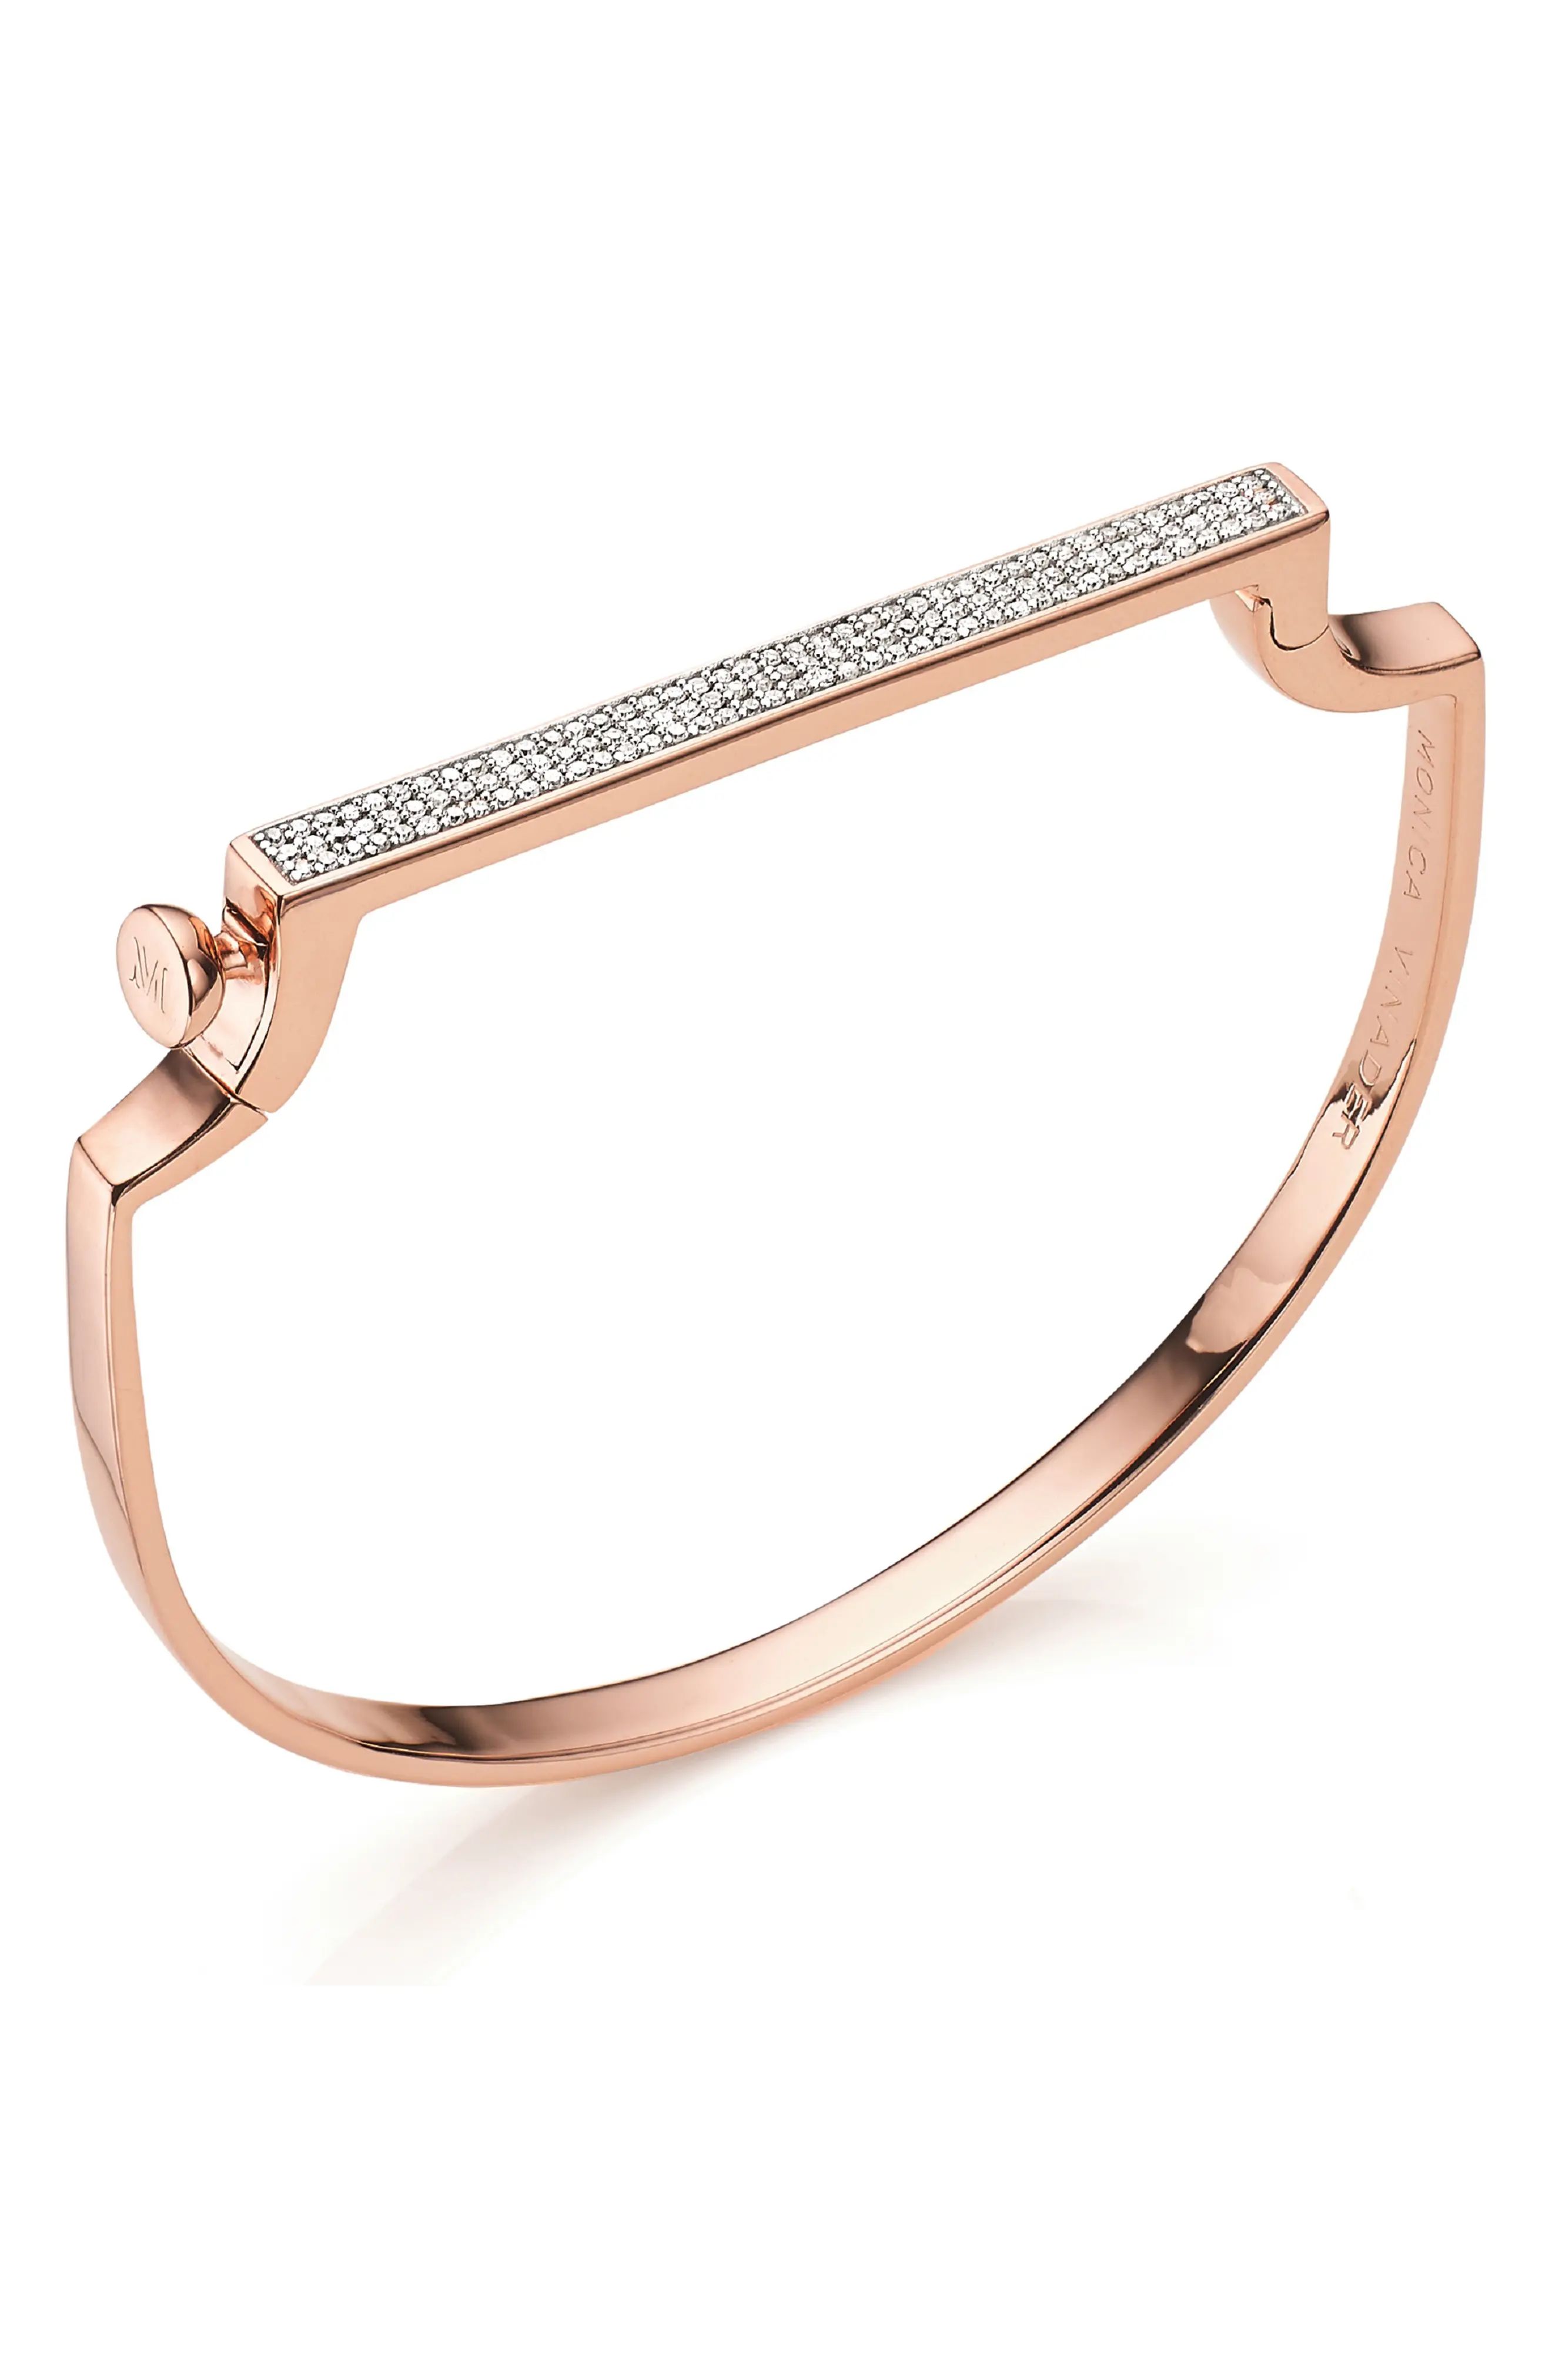 Monica Vinader Signature Thin Diamond Bangle, Size Small in Rose Gold/Diamond at Nordstrom | Nordstrom